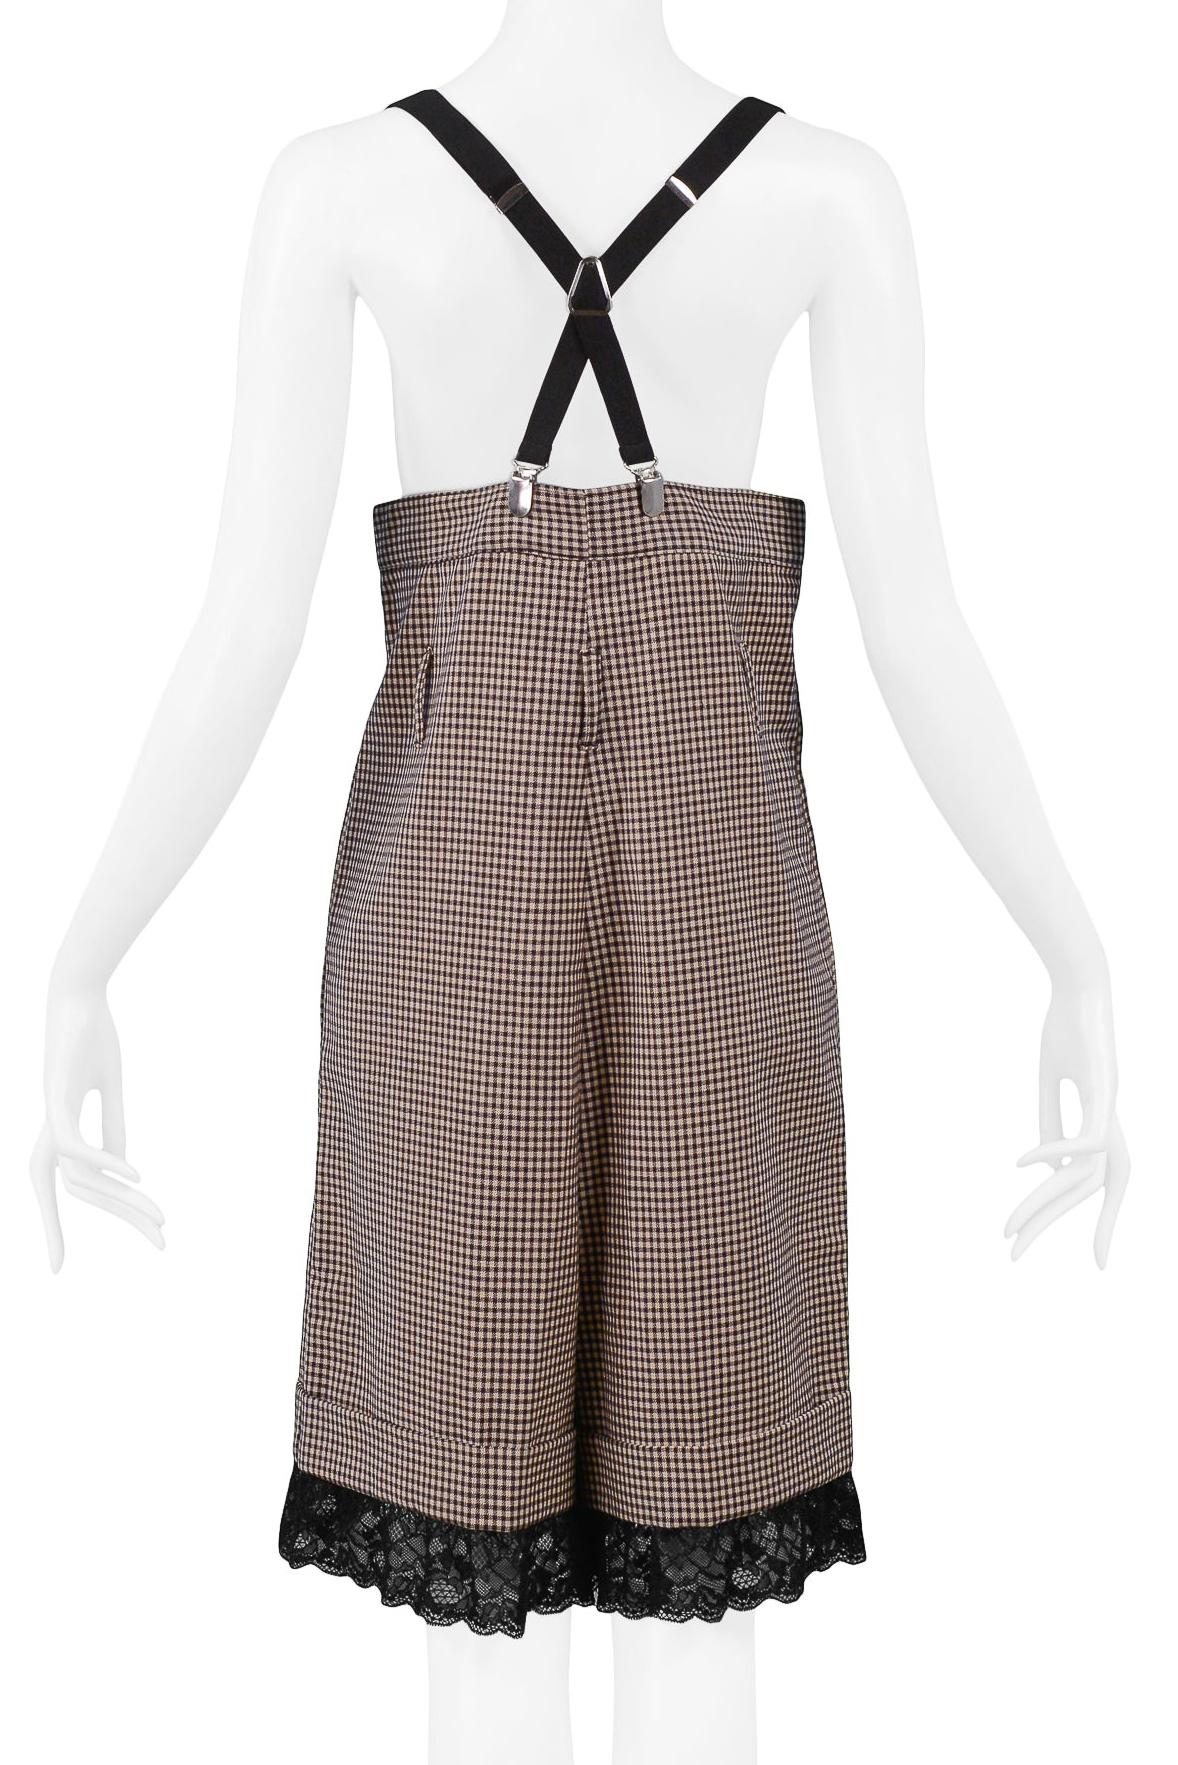 Gray Jean Paul Gaultier Brown Check High Waisted Suspender Shorts For Sale